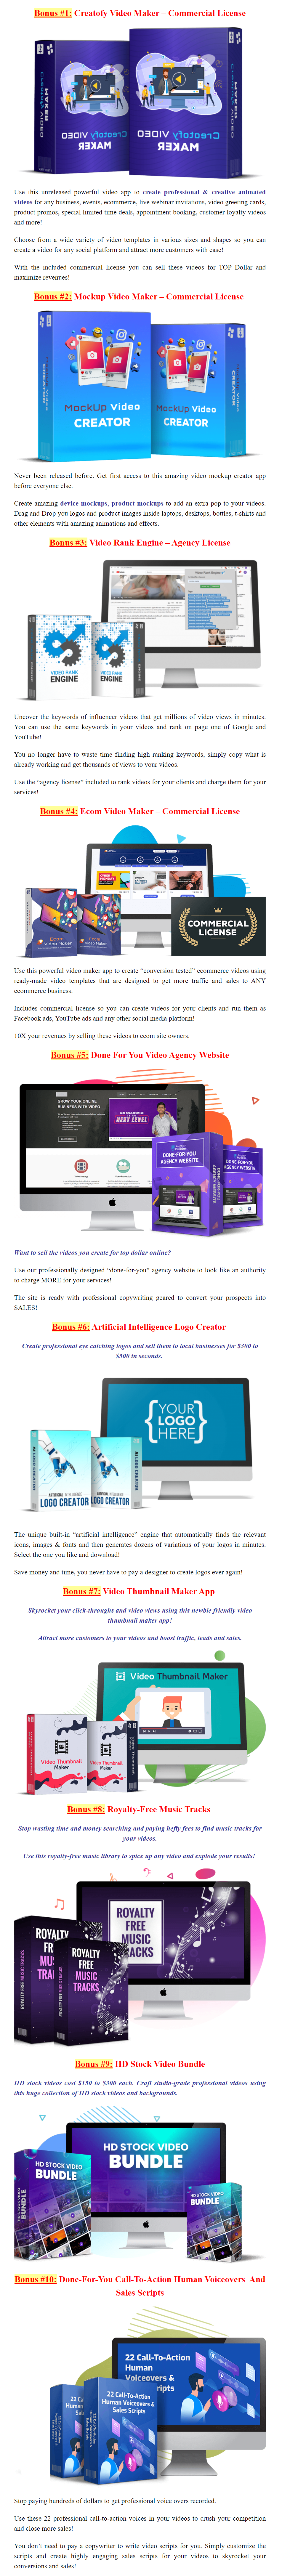 SellersPal Review & OTO’s: ALL-IN-ONE Marketing Platform For Entrepreneurs 6